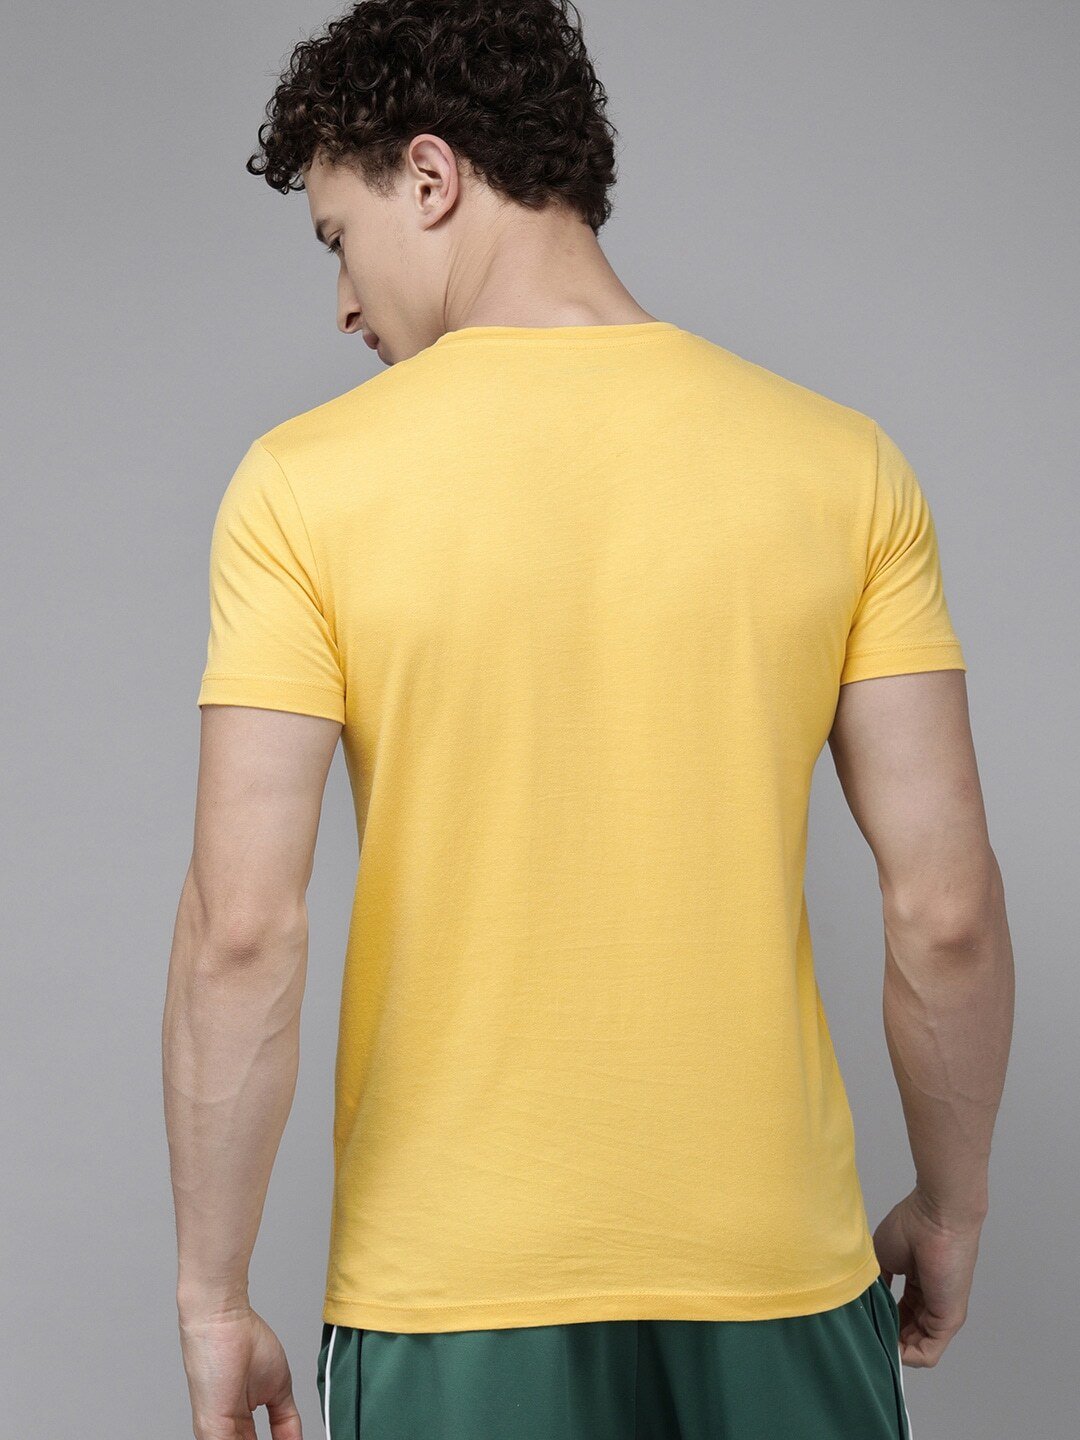 Men Yellow Typography Printed Slim Fit Pure Cotton T-shirt-2502891003